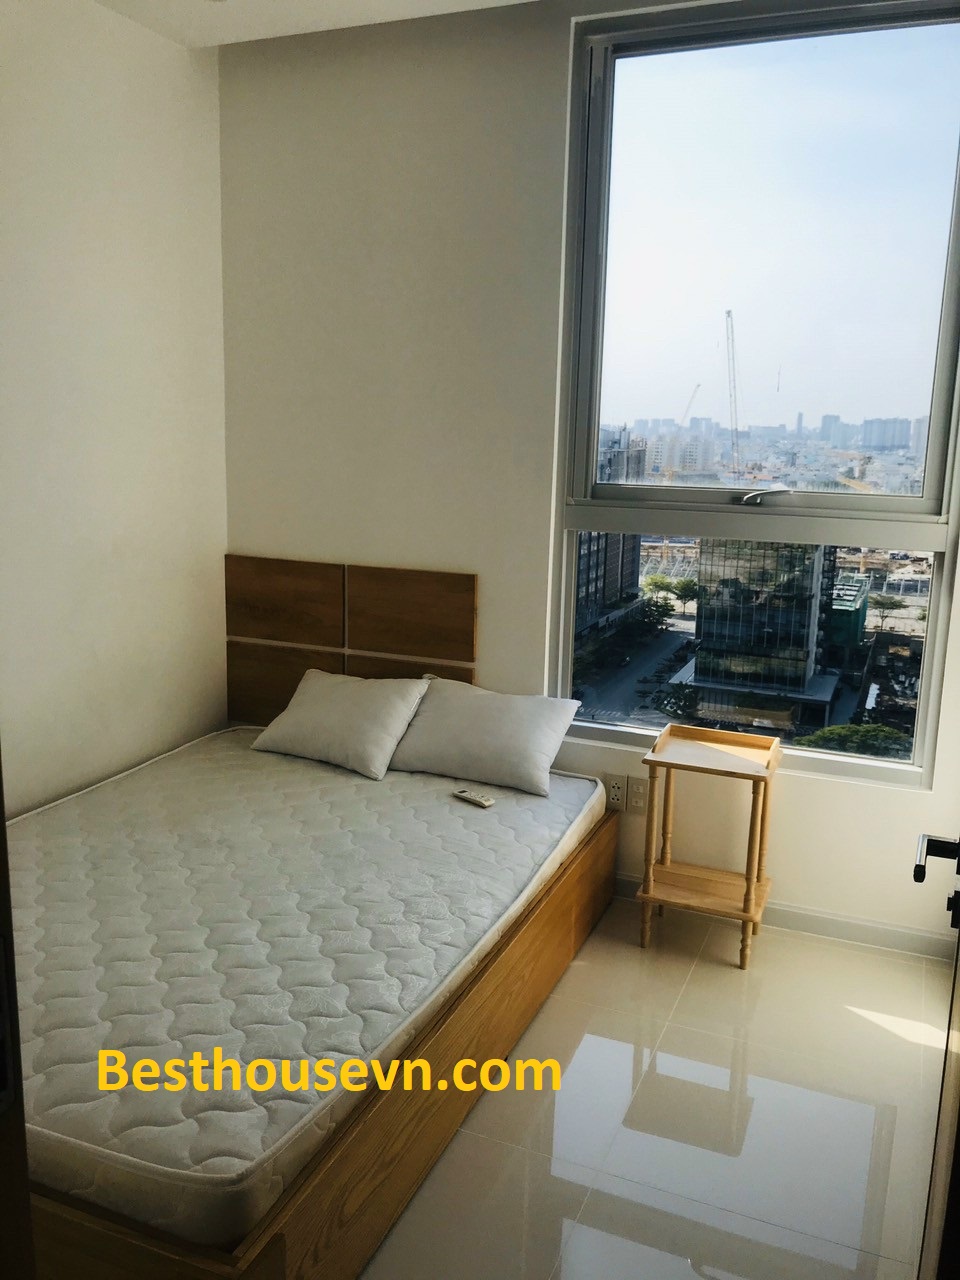 aparment-for-rent-in-star-hill-district-7-hcmc-saigon